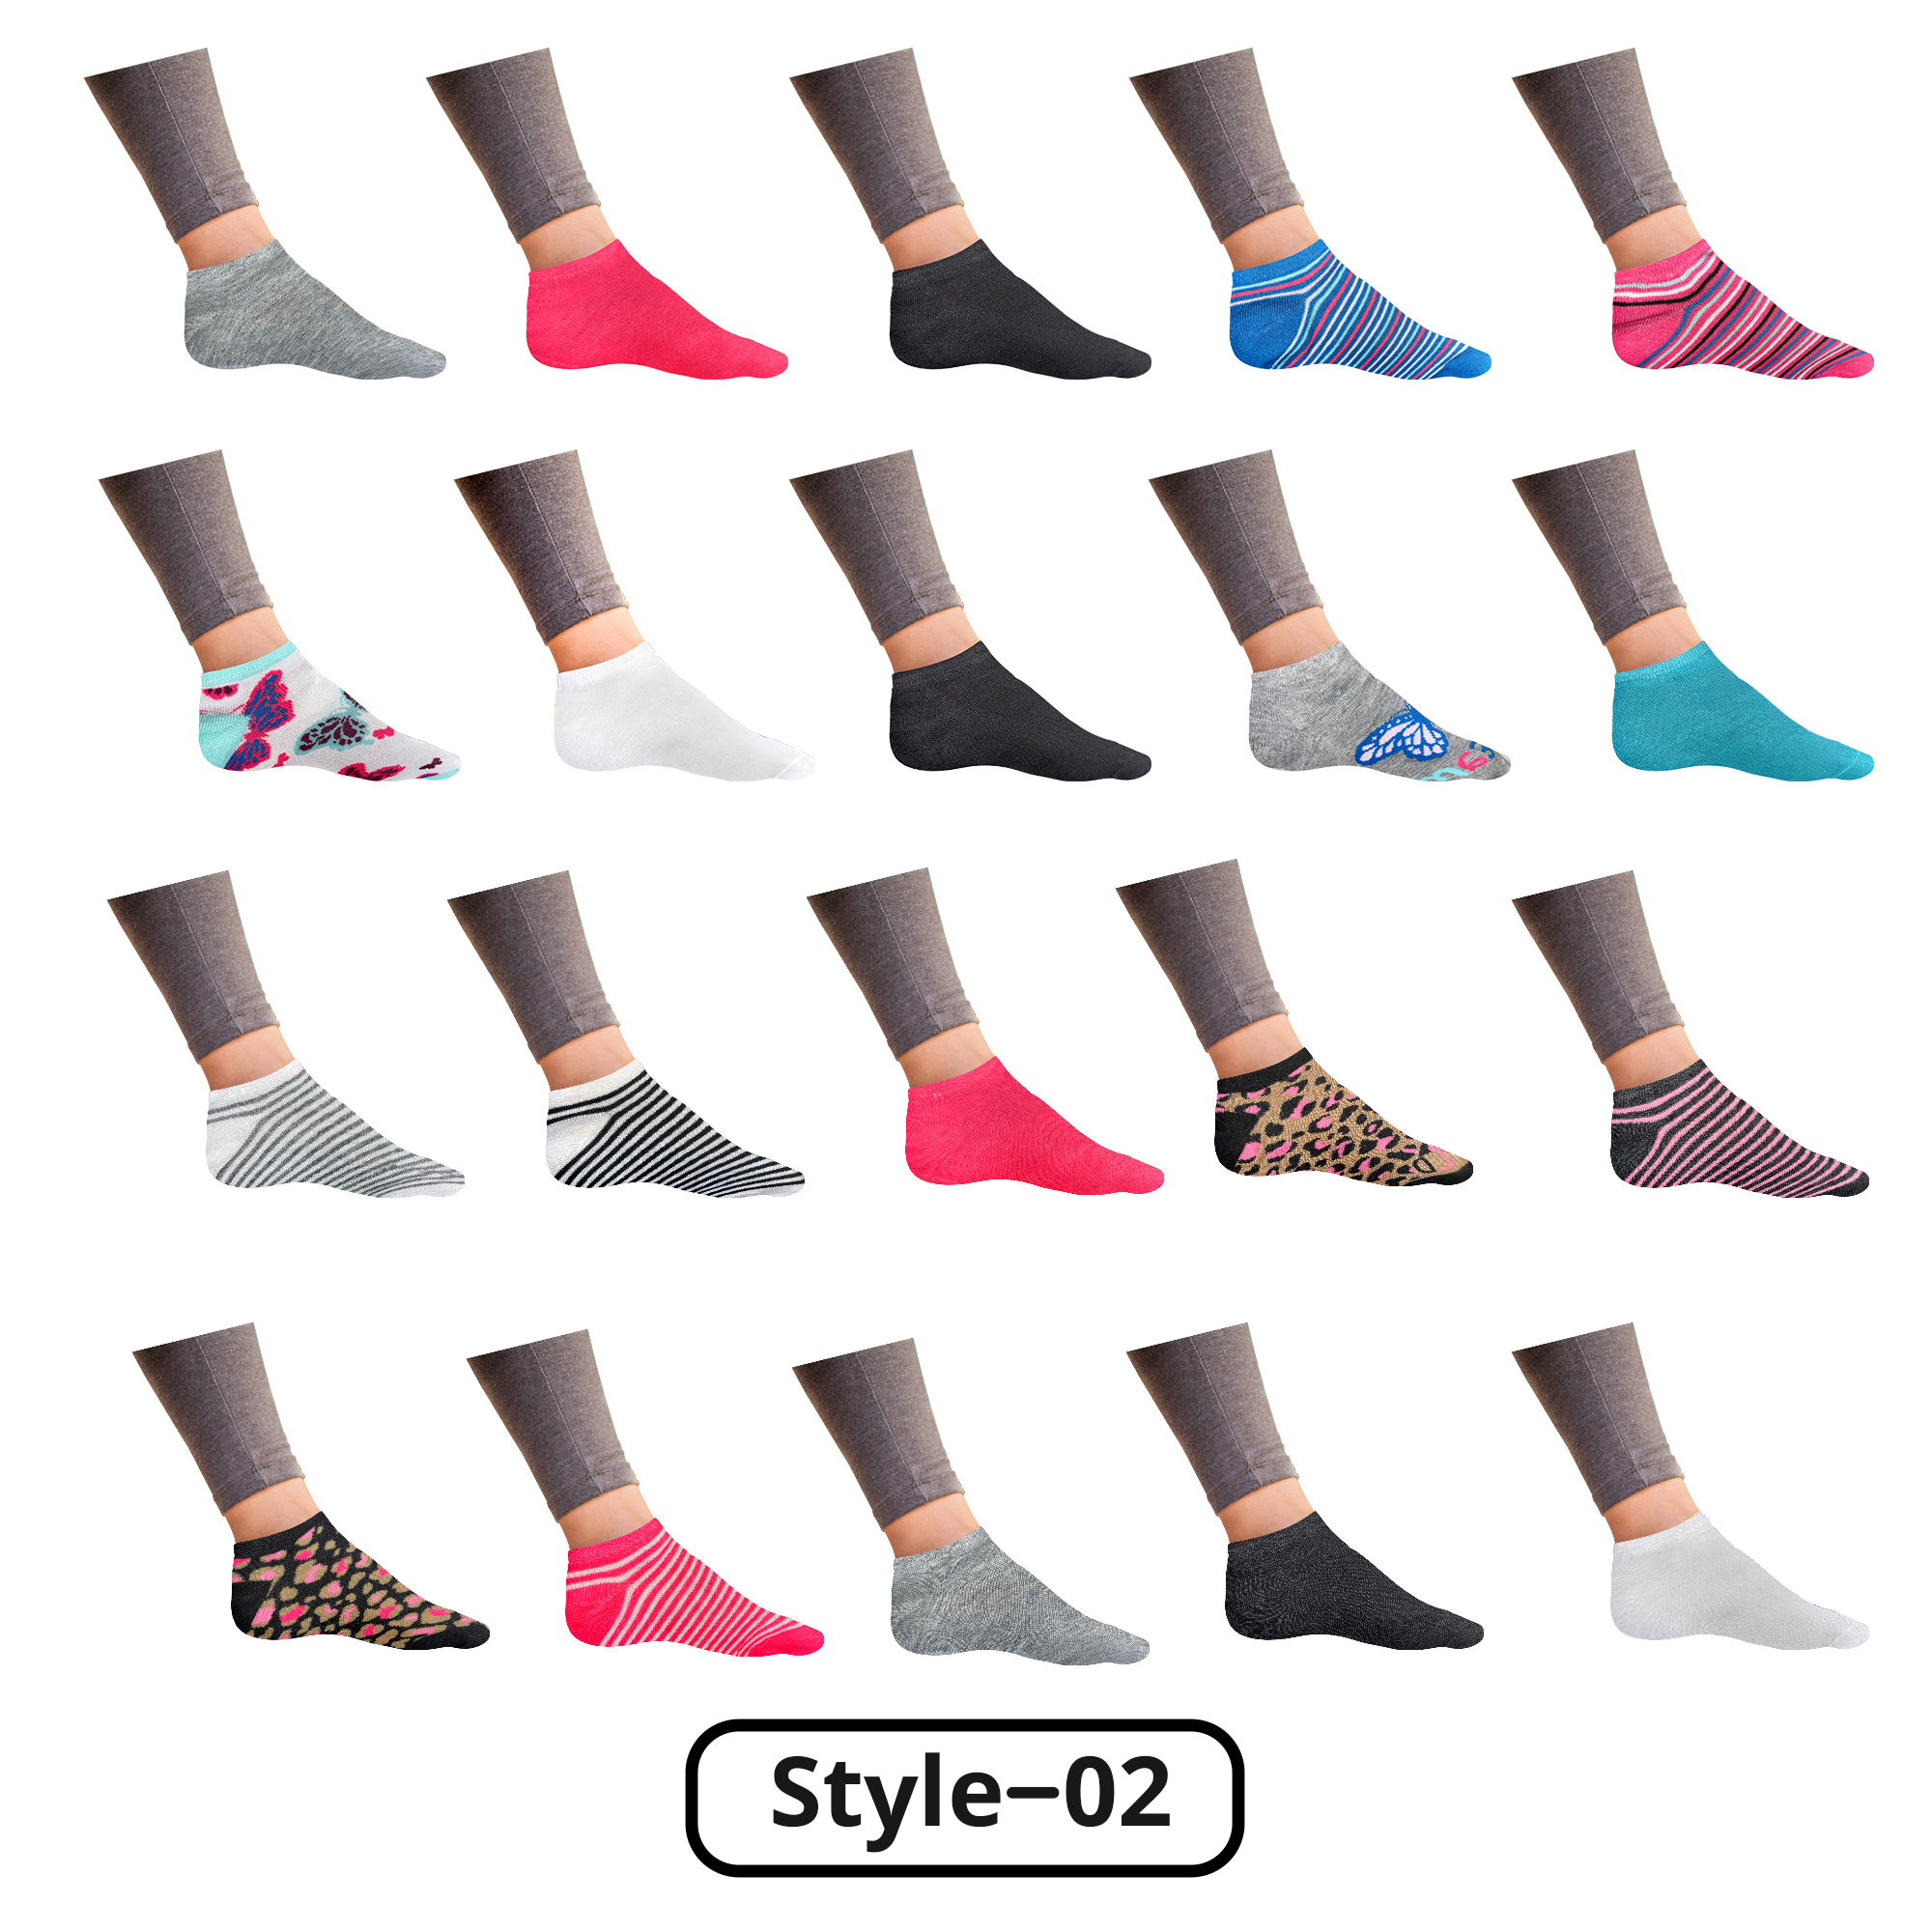 20-Pairs: Women’s Breathable Stylish Colorful Fun No Show Low Cut Ankle Socks - Style 6